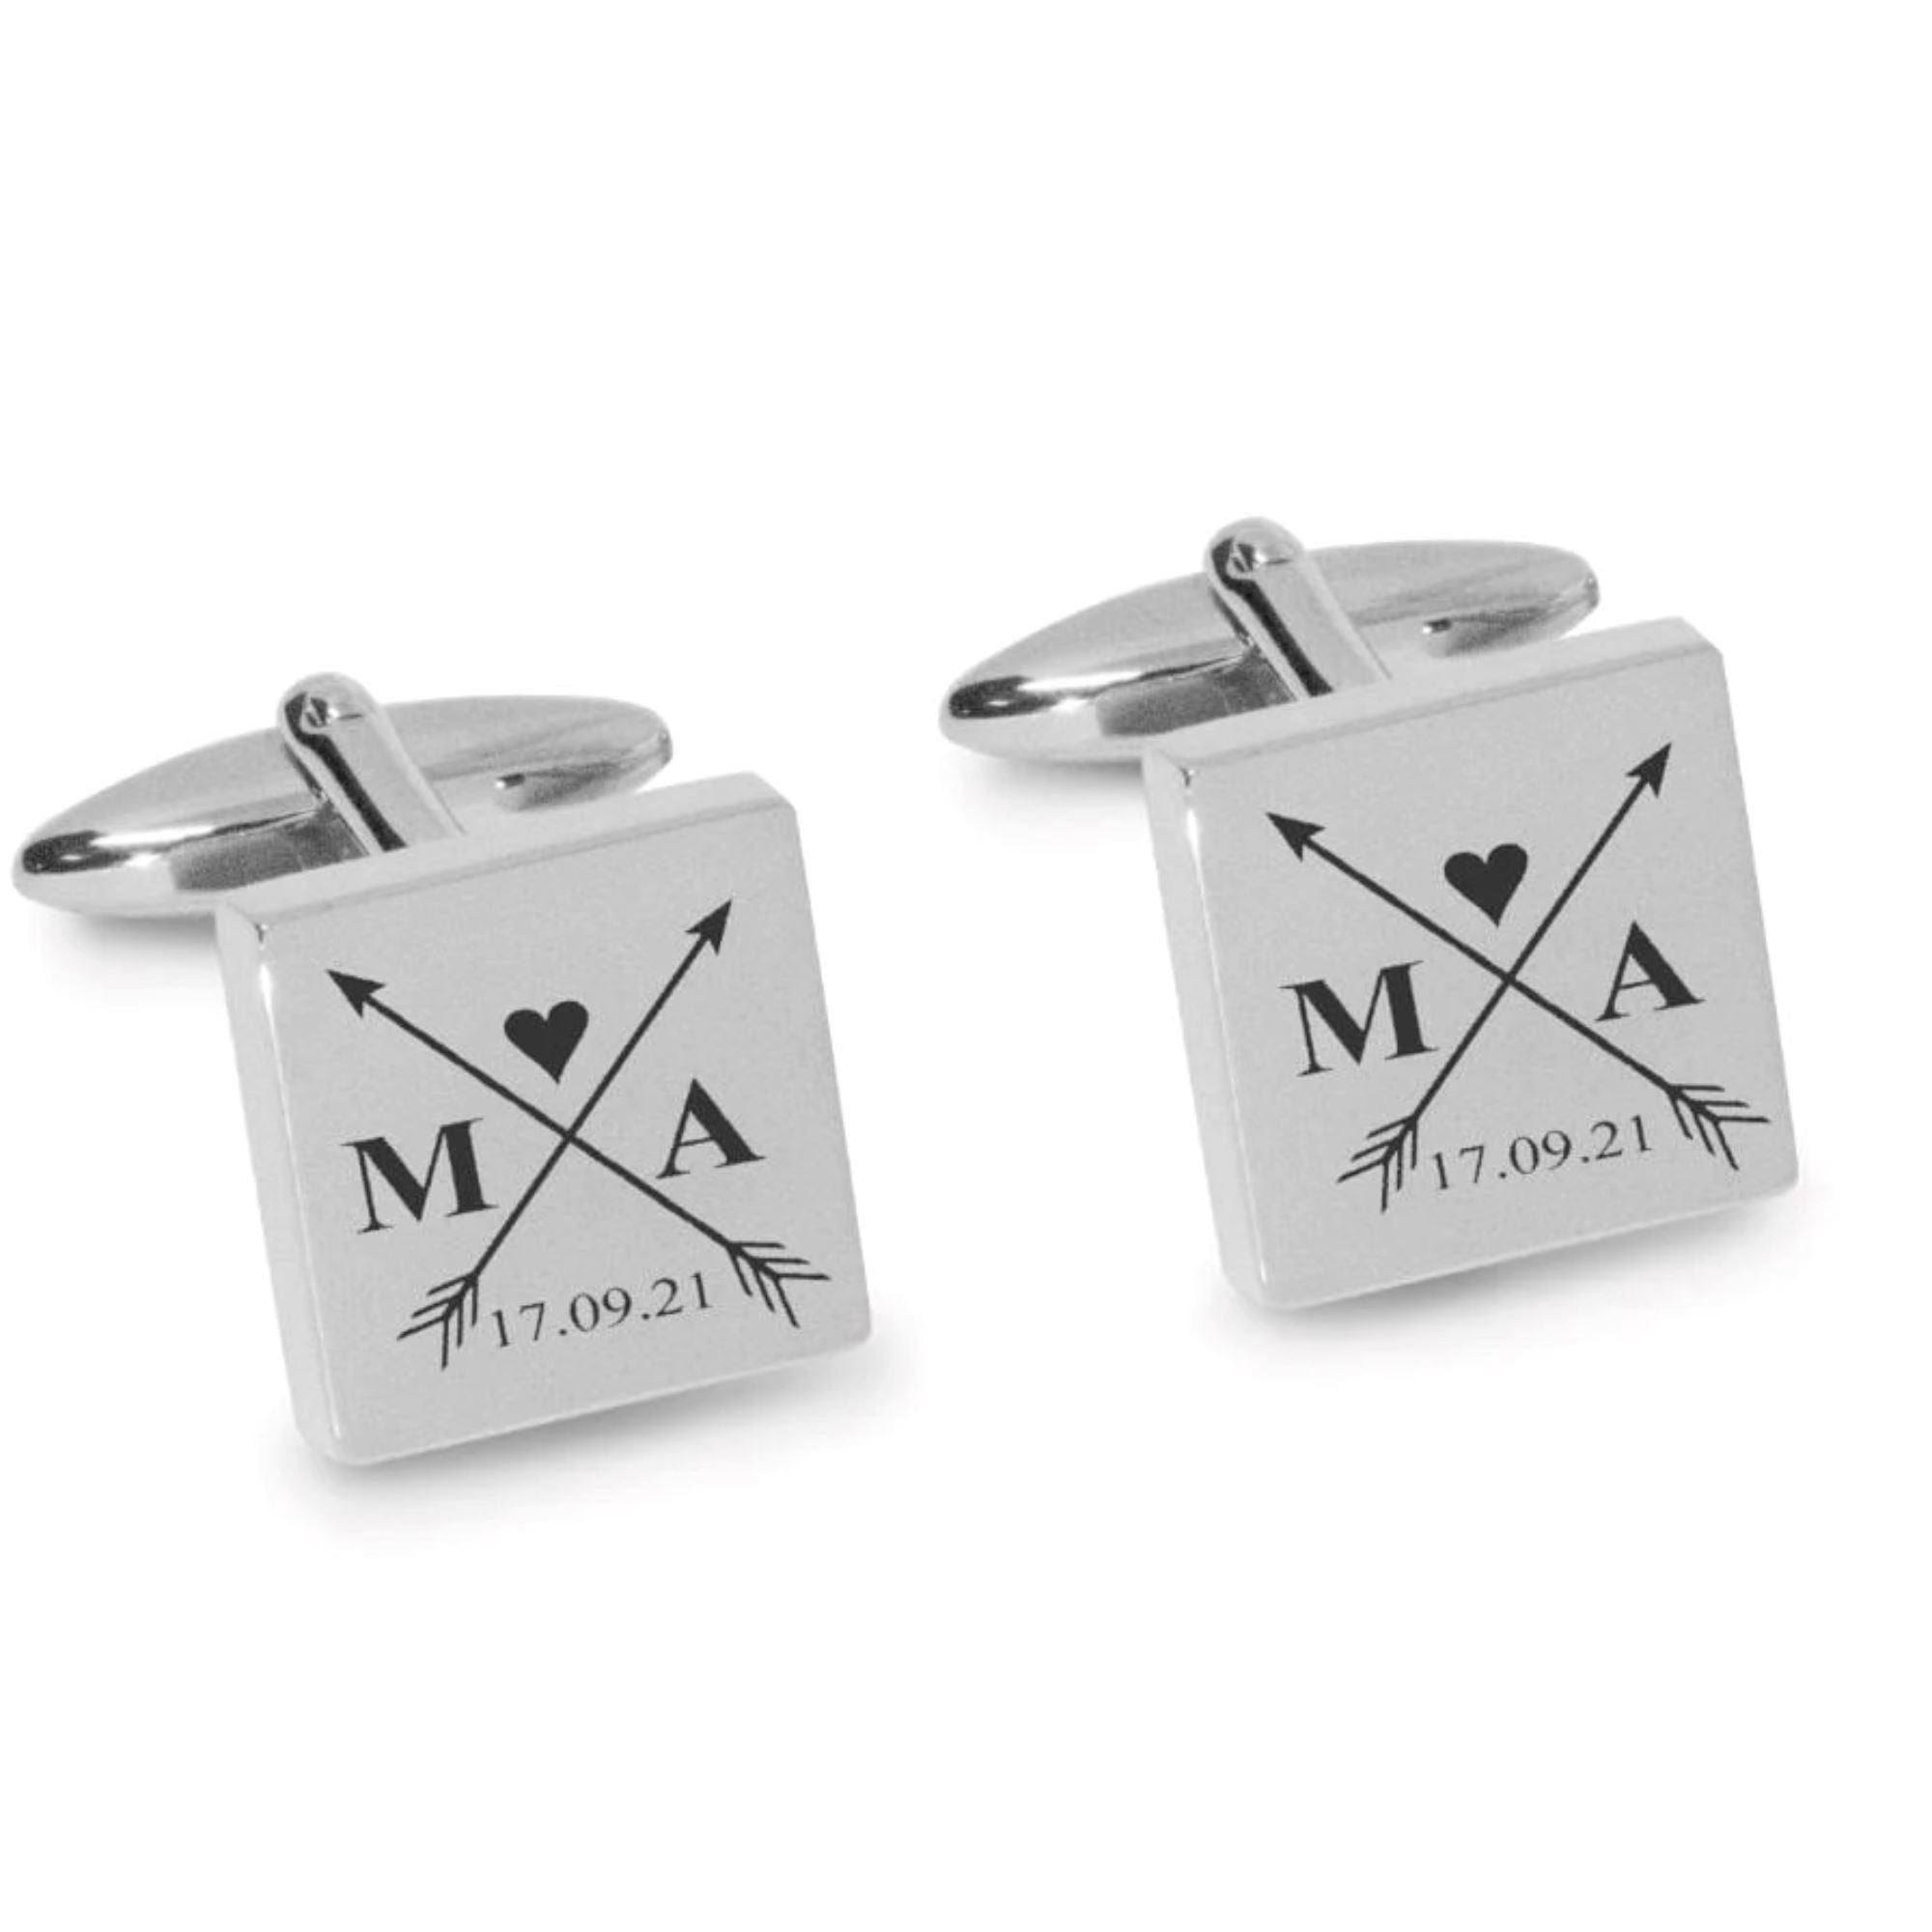 Crossed Arrows with Loveheart, Initials and Date Engraved Cufflinks Engraving Cufflinks Clinks Australia 